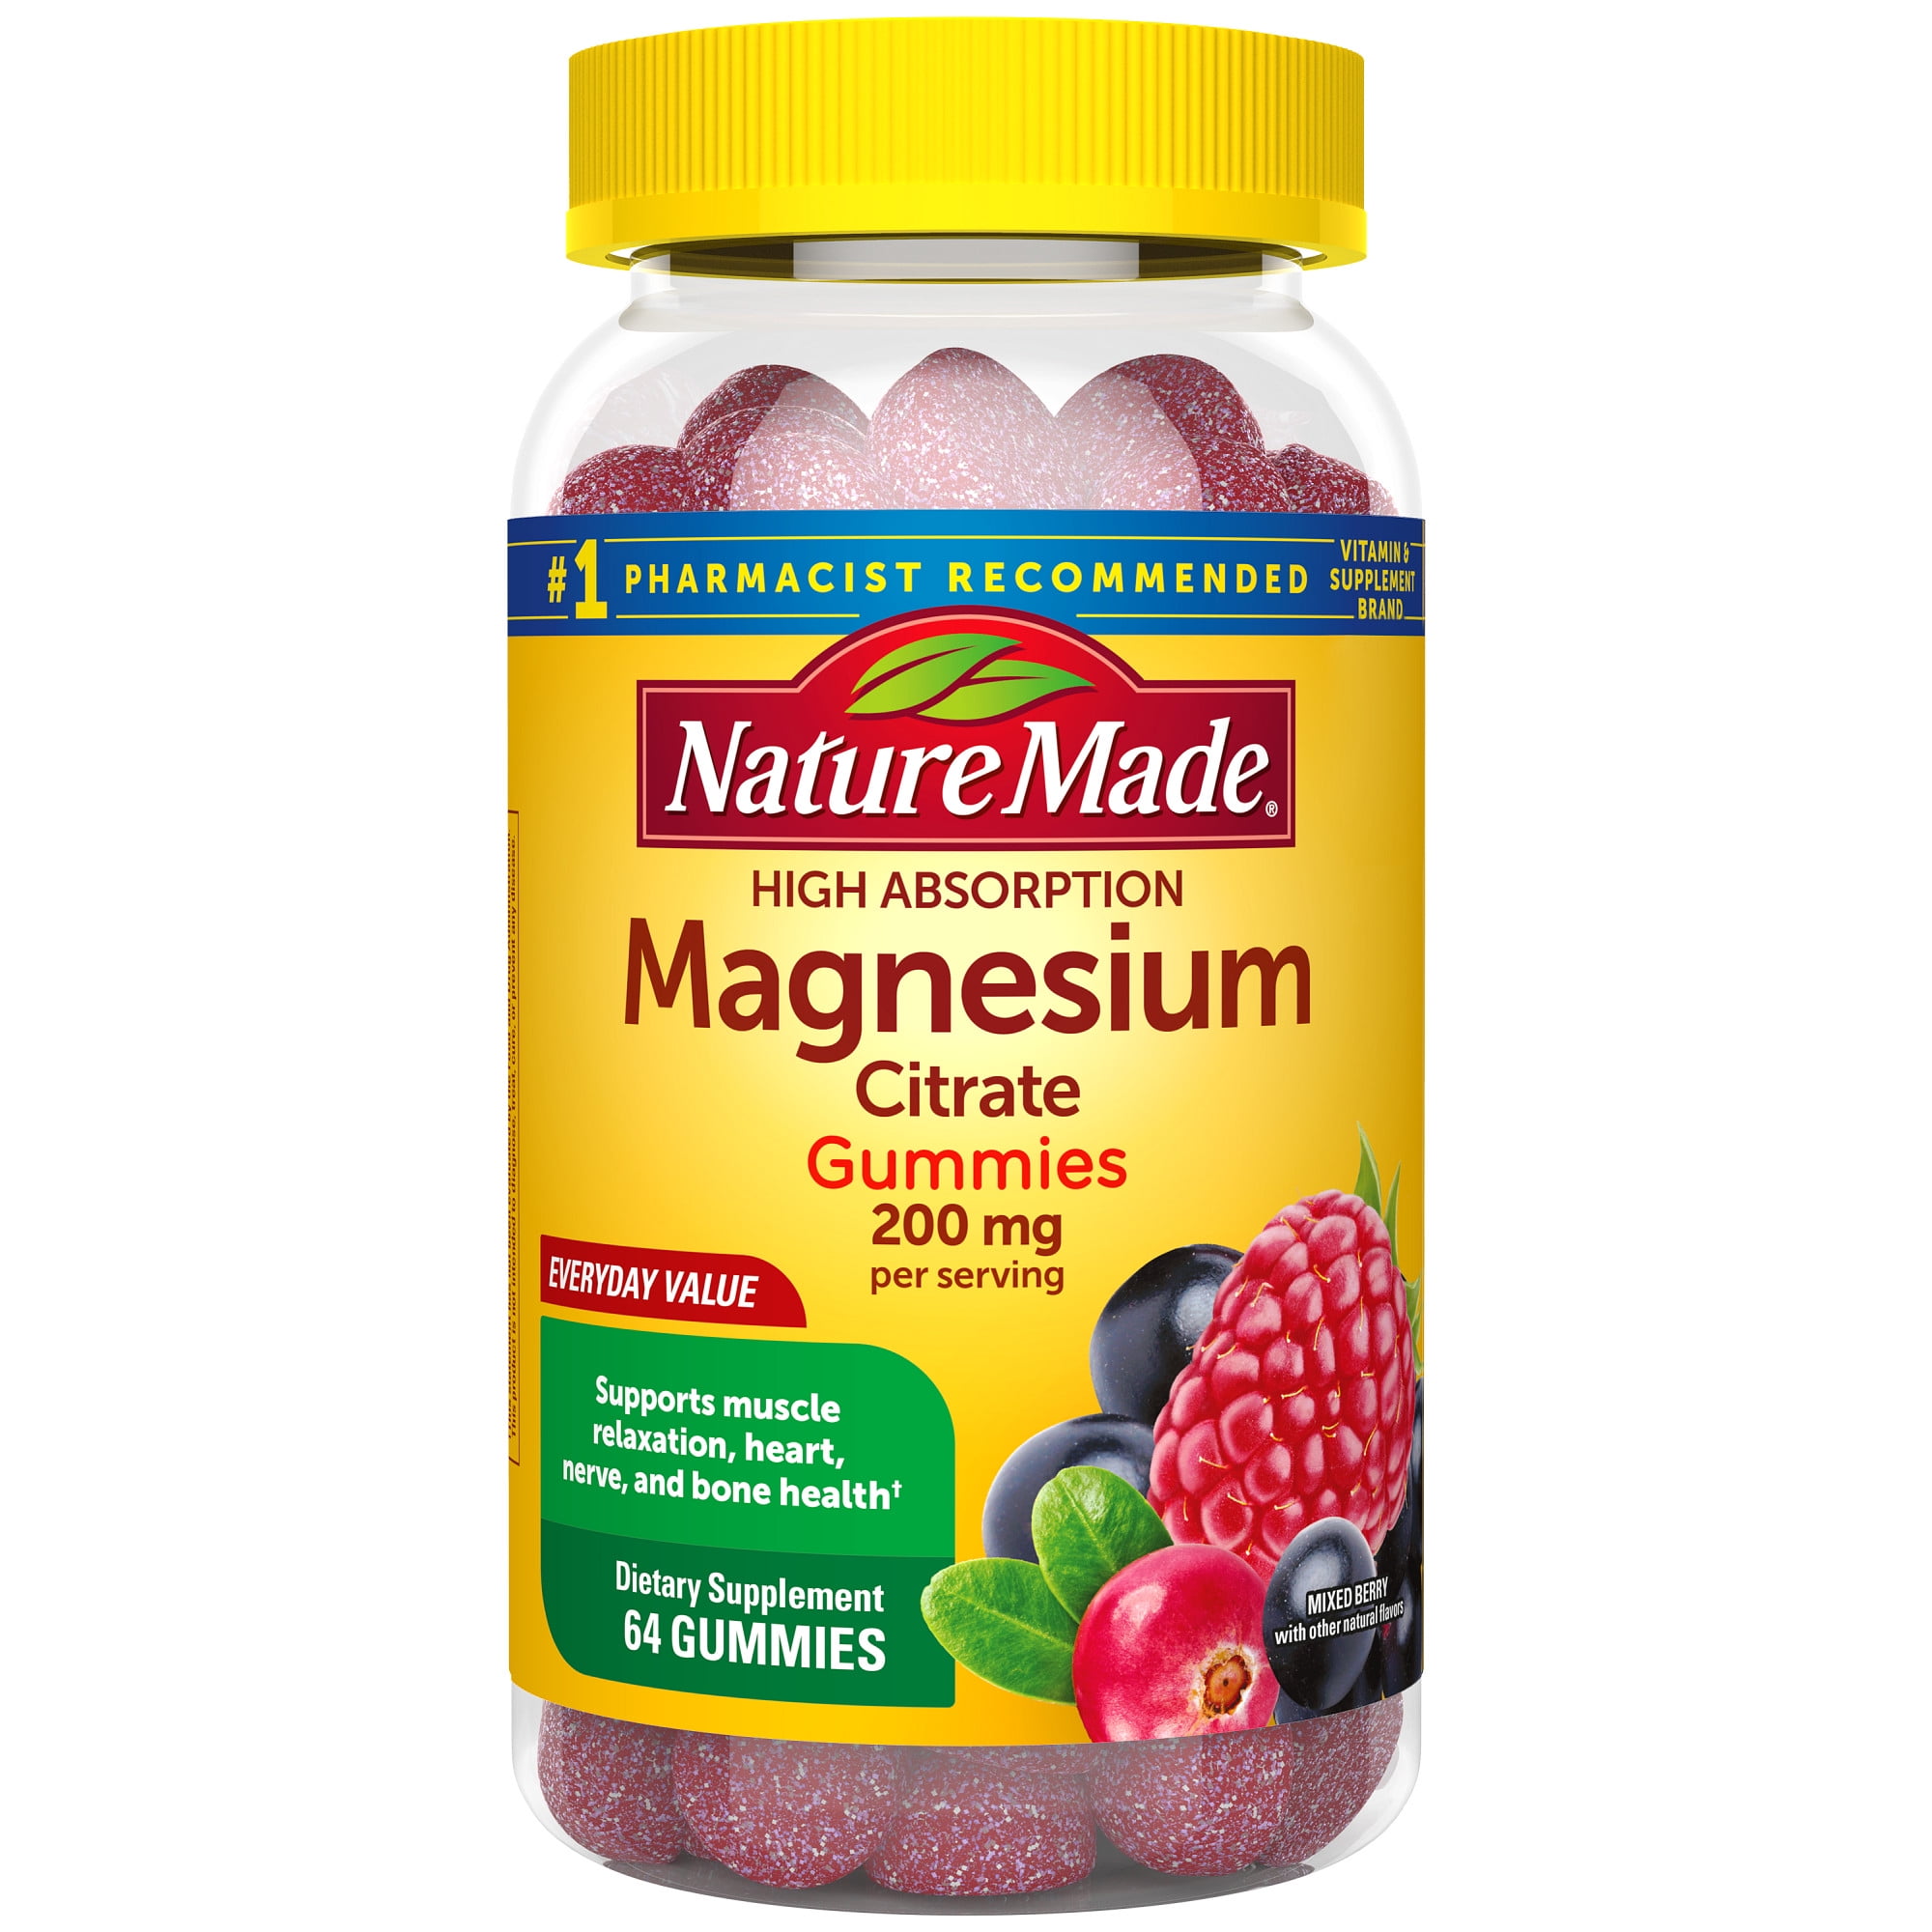 Nature Made High Absorption Magnesium Citrate 200mg Gummies Supplement 64 Count - Walmartcom